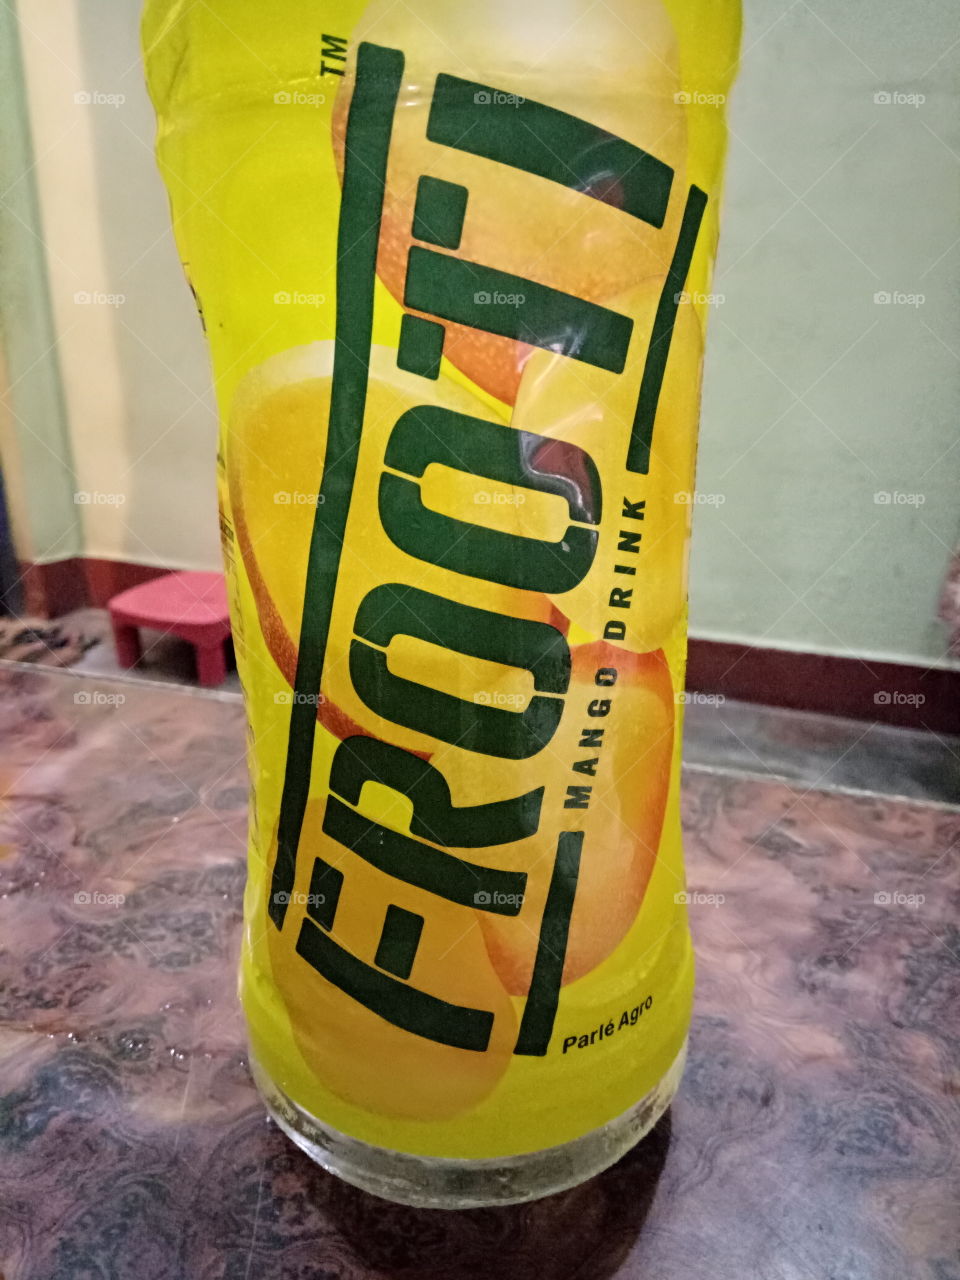 boy crazy about frooti ,how to drink ,frooti image ,addicted to the mango tastes
thanks